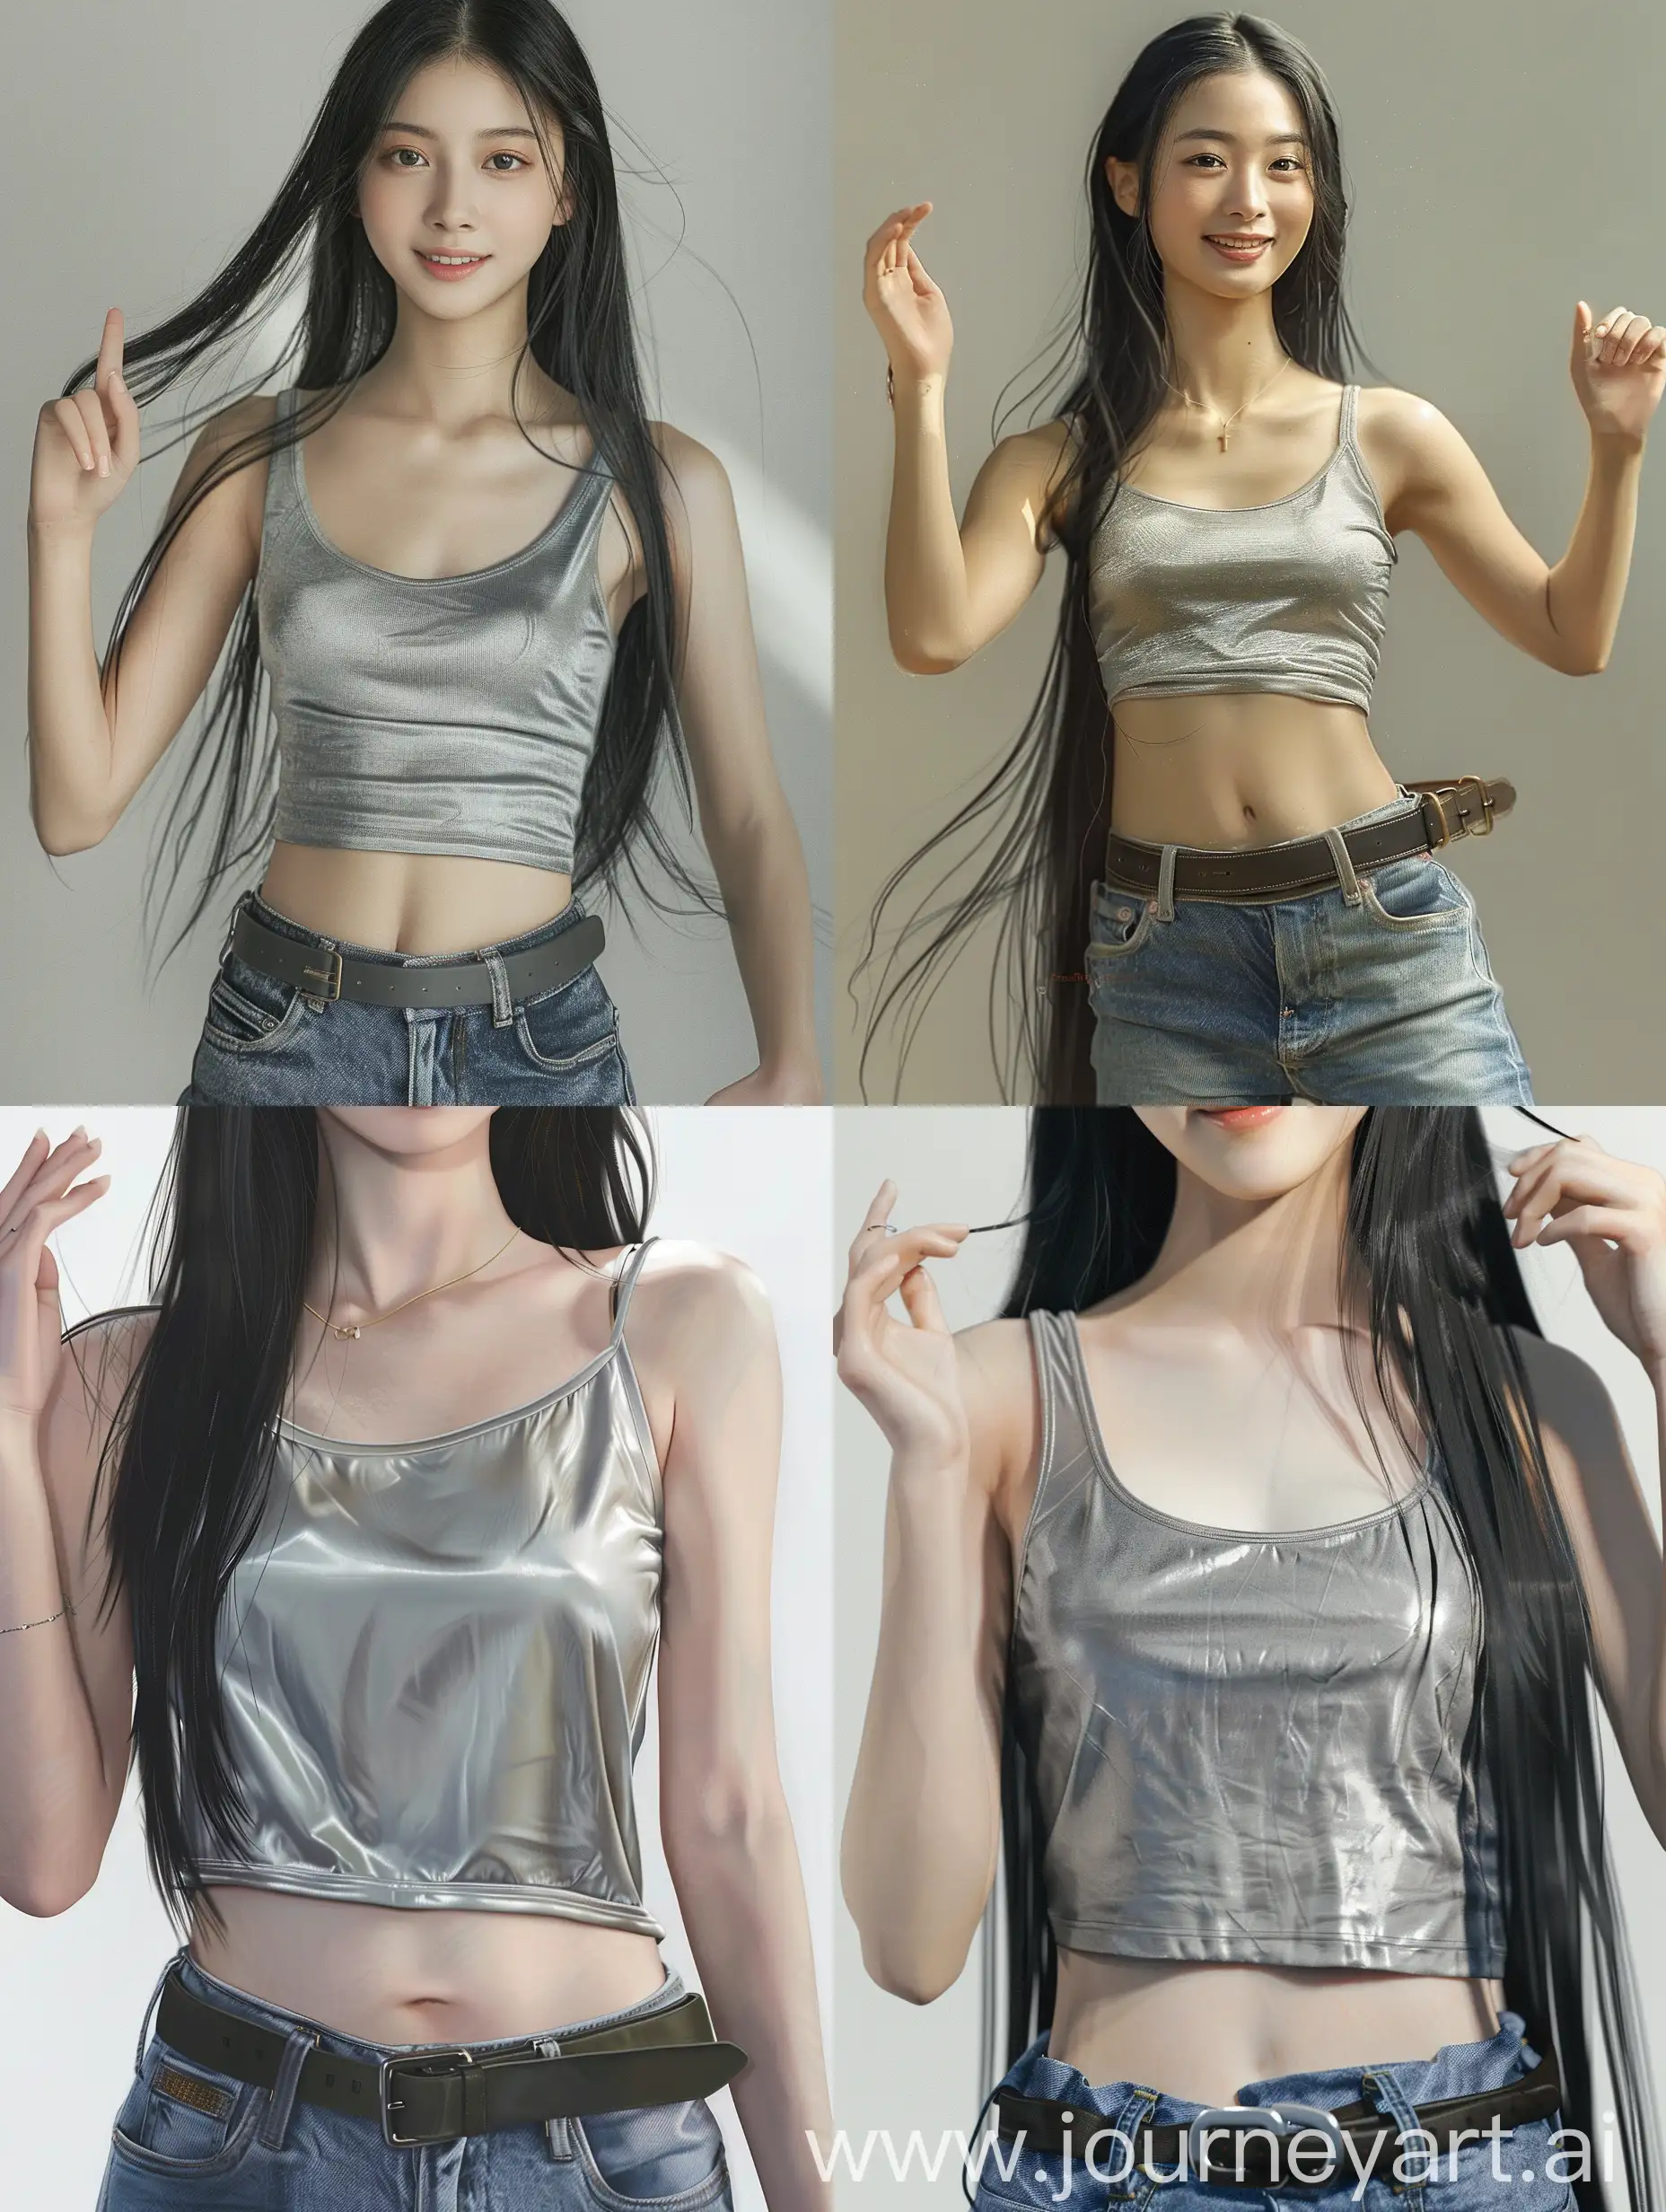 realistic style, showing the bust of an asian girl, 20 years old, long thin black hair, slightly smiling, thin silver gray tank top, she is fashion styling introducing her shirt, first hand raised gracefully, second hand placed on belt, jeans, simple background, focused light